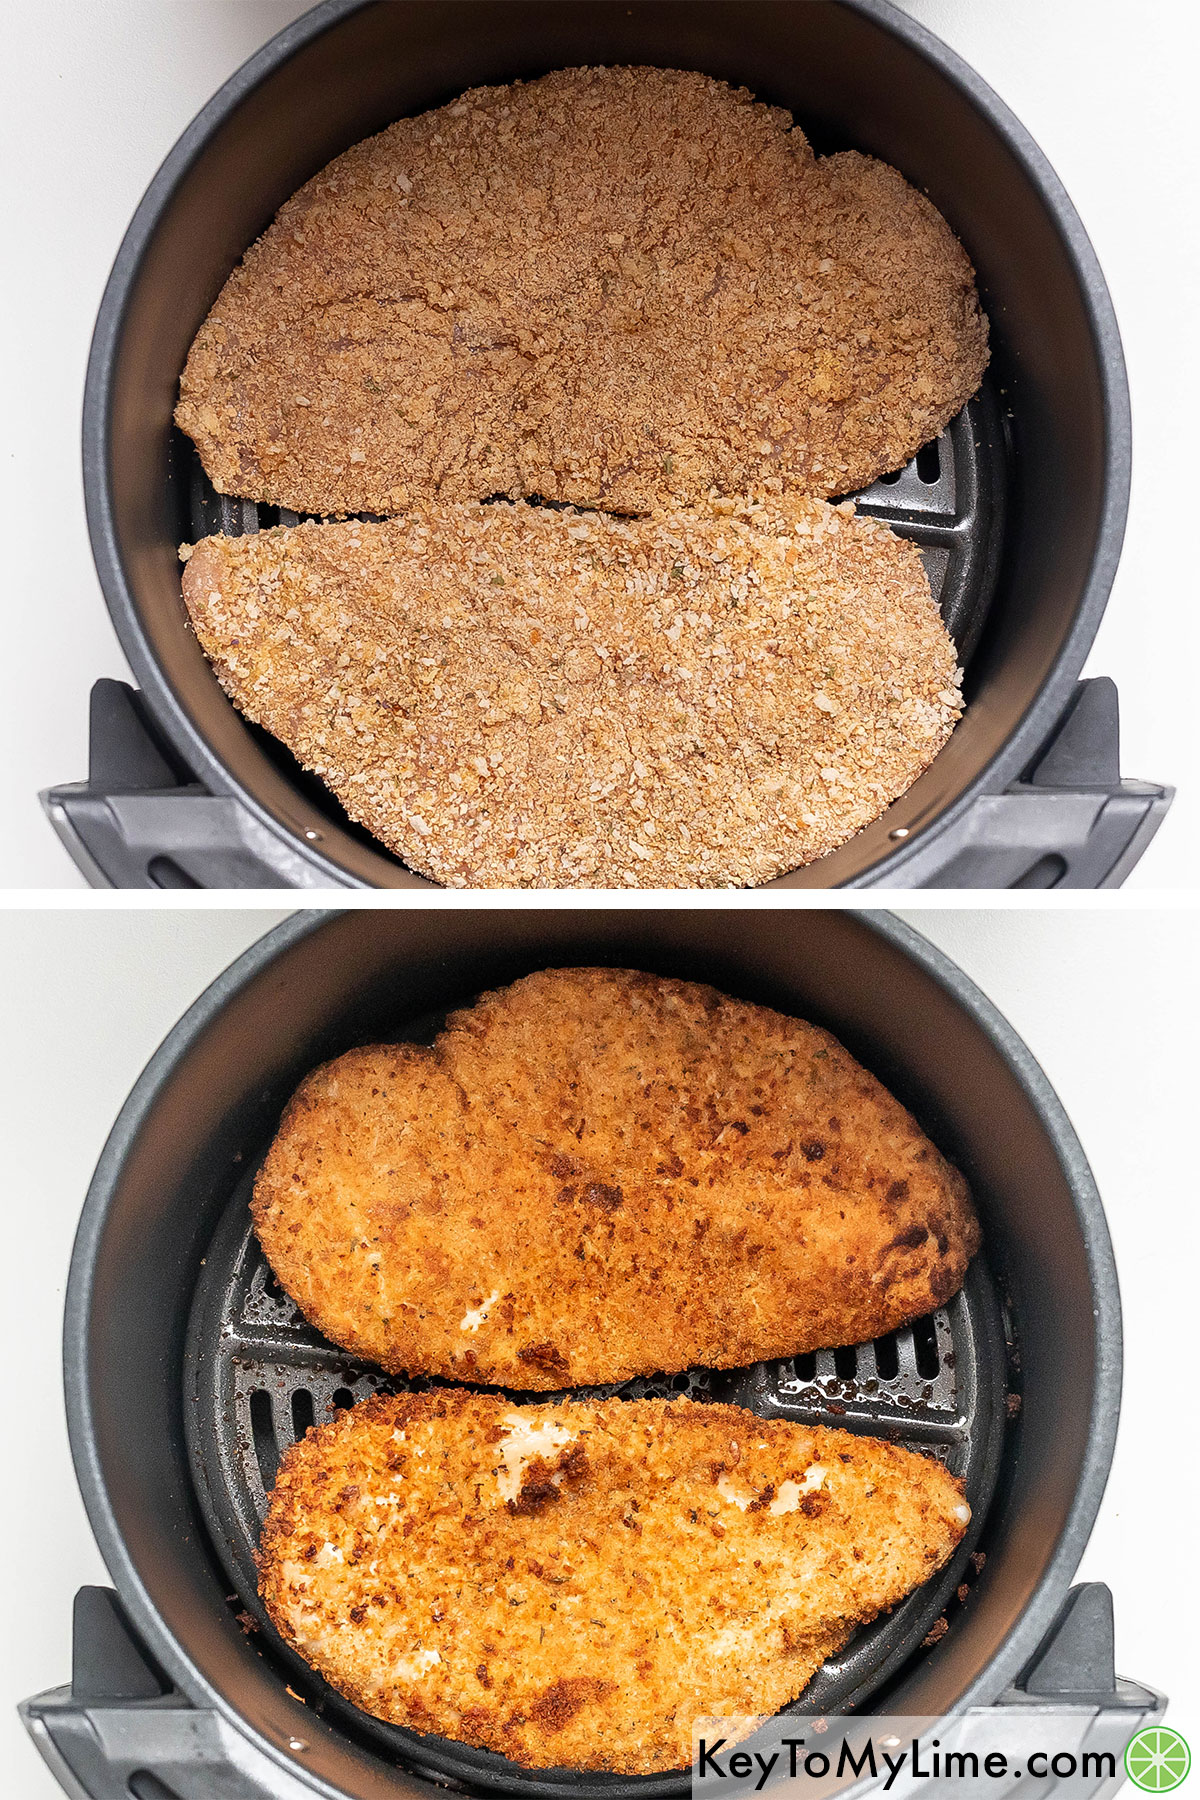 Placing the cutlets in a preheated air fryer basket and then coating with spray oil.